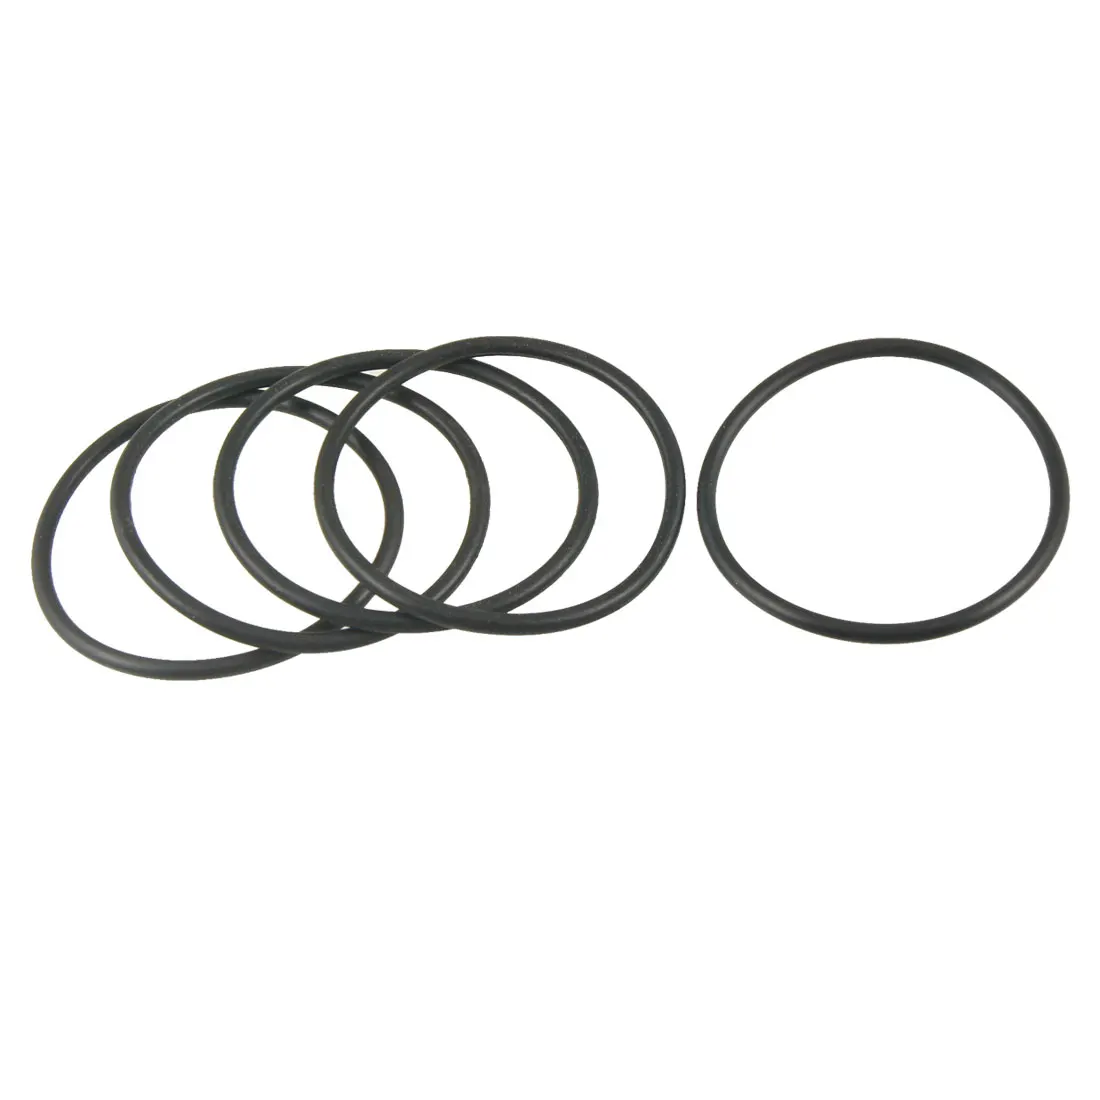 uxcell 66mm x 3.5mm x 59mm Rubber Sealing Oil Filter O Rings Gaskets 5 Pcs 